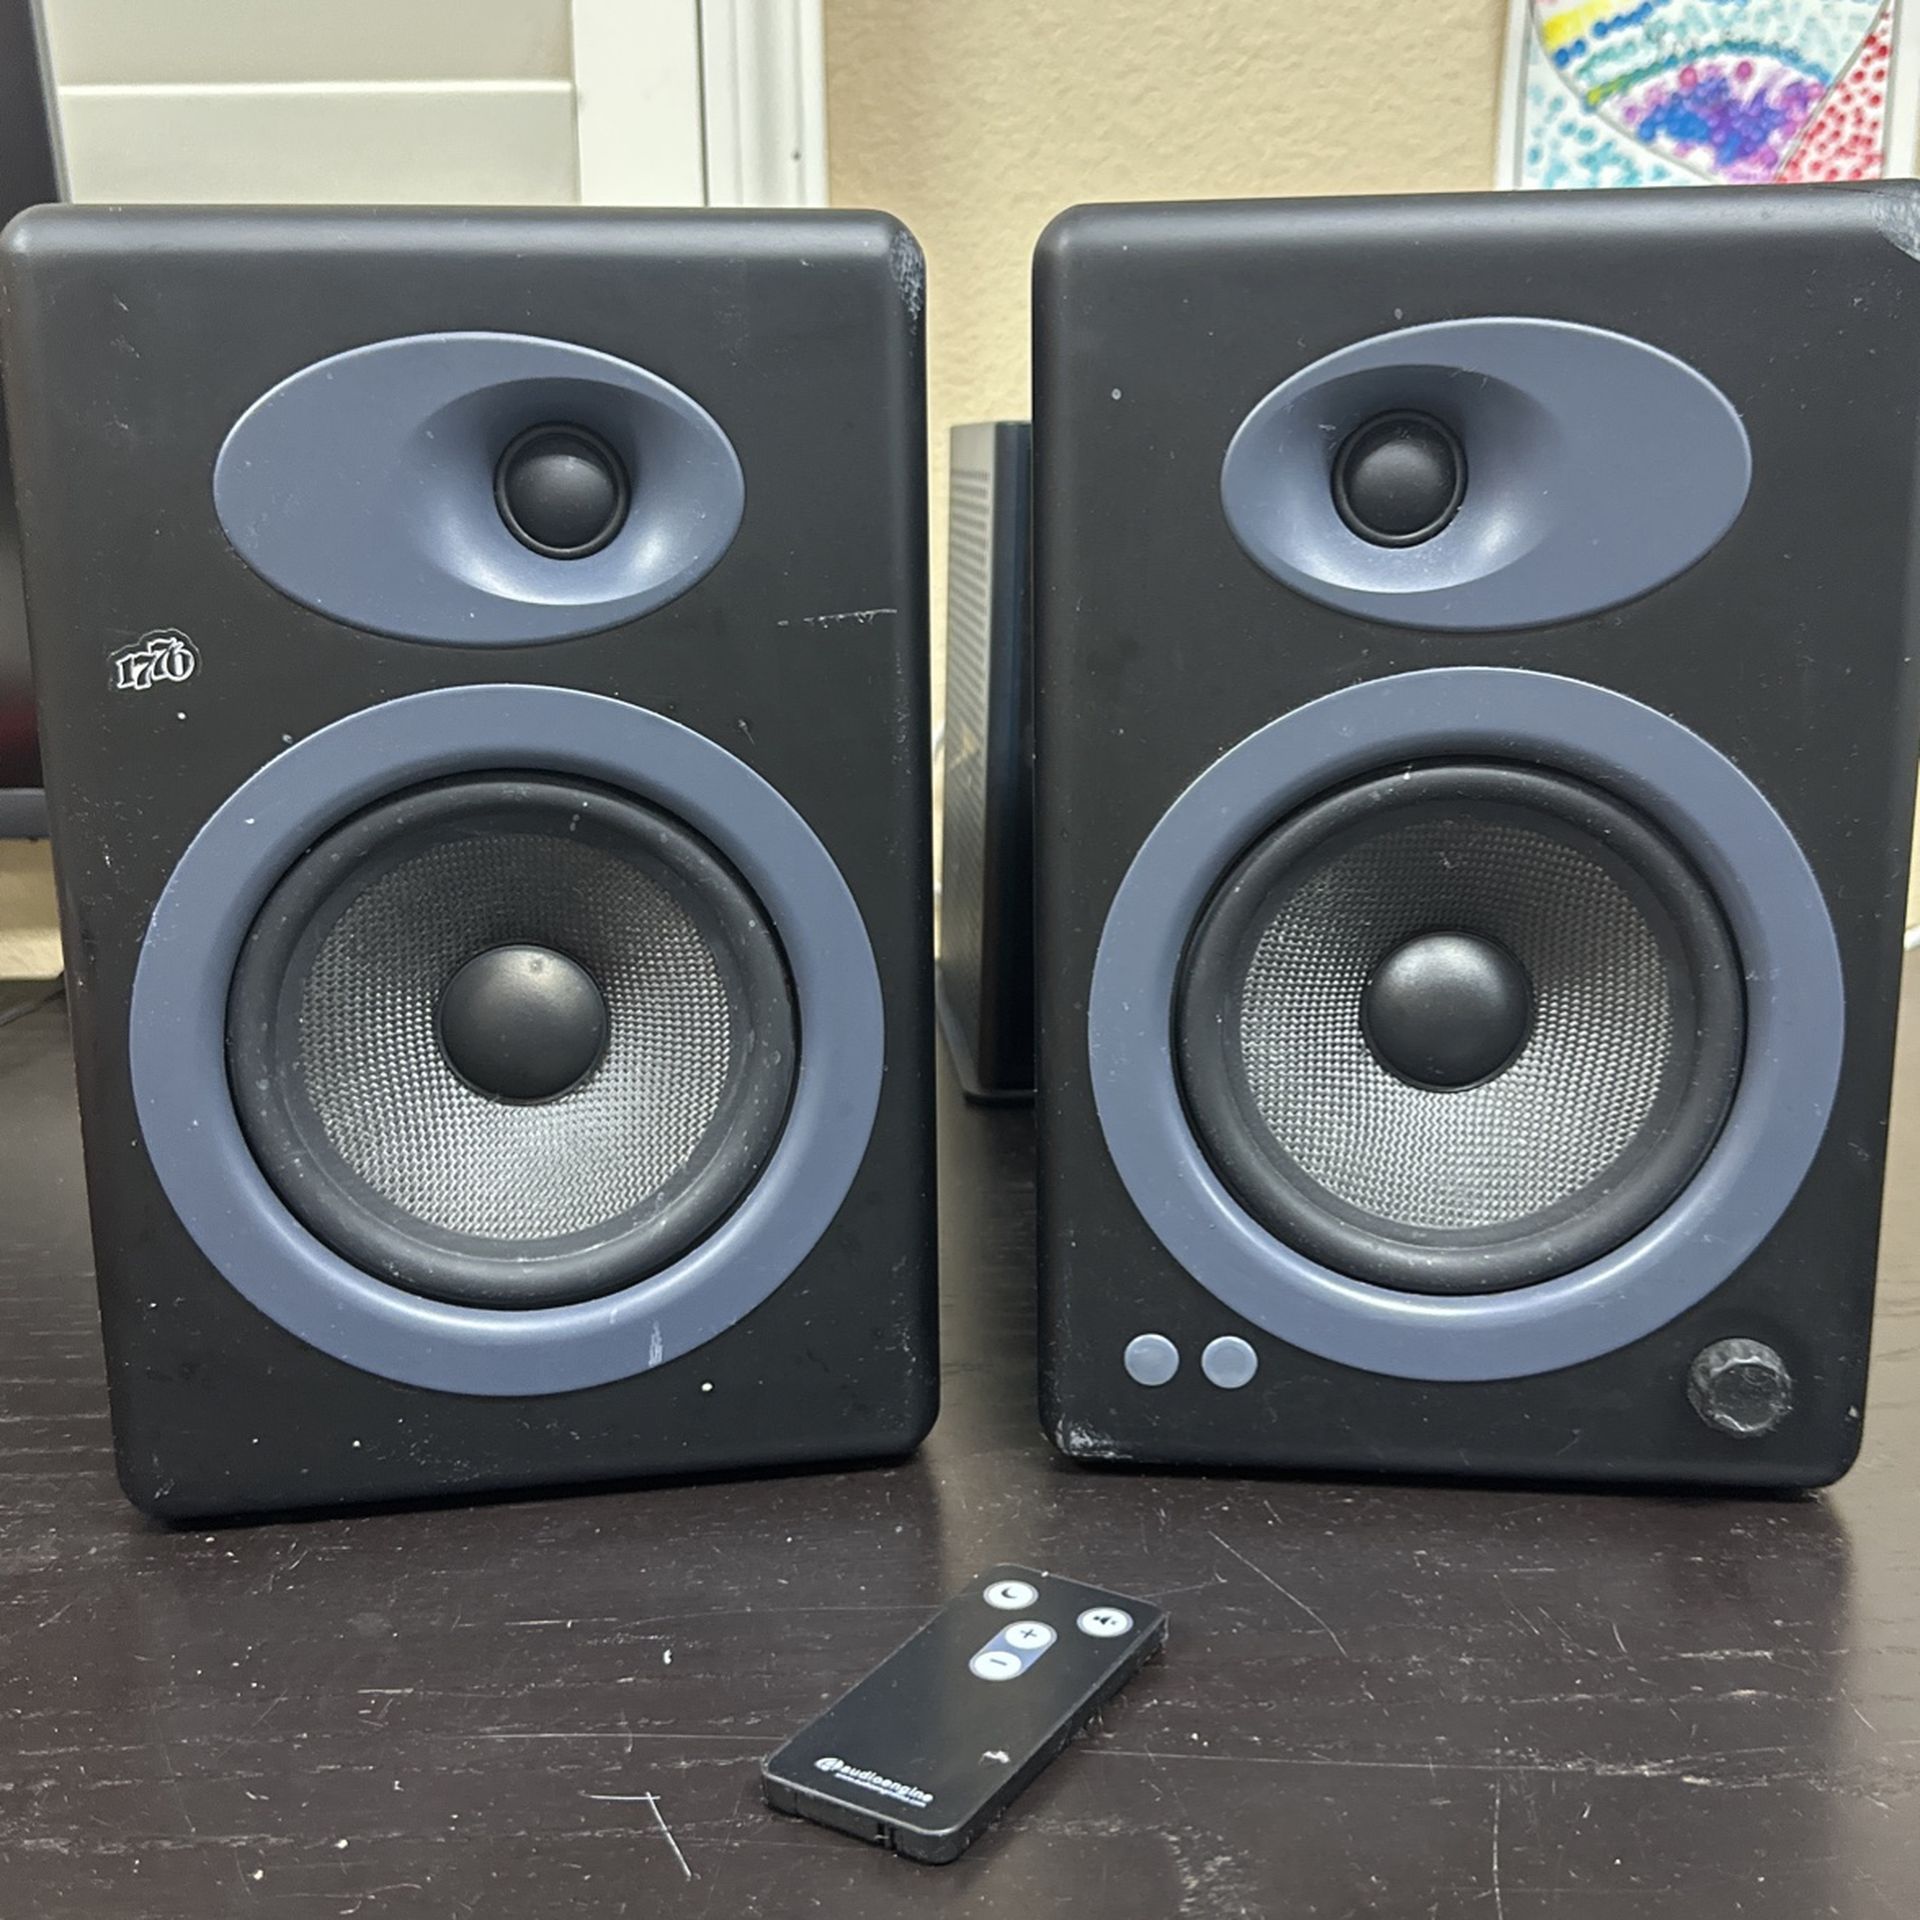 2 Set Of Computer Speakers audioengine With Remote Control 